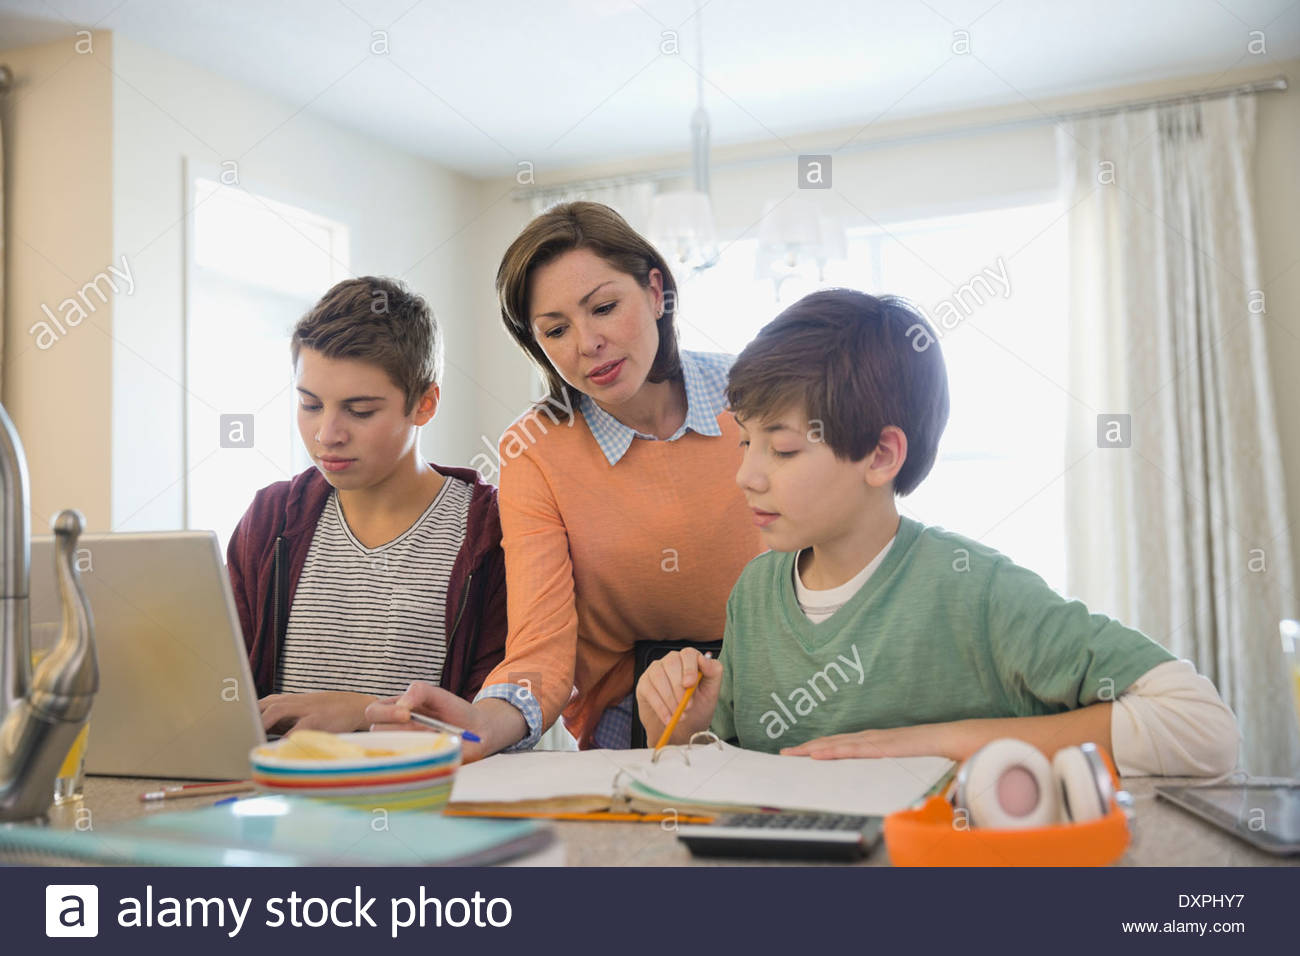 Mother assisting son with homework Stock Photo